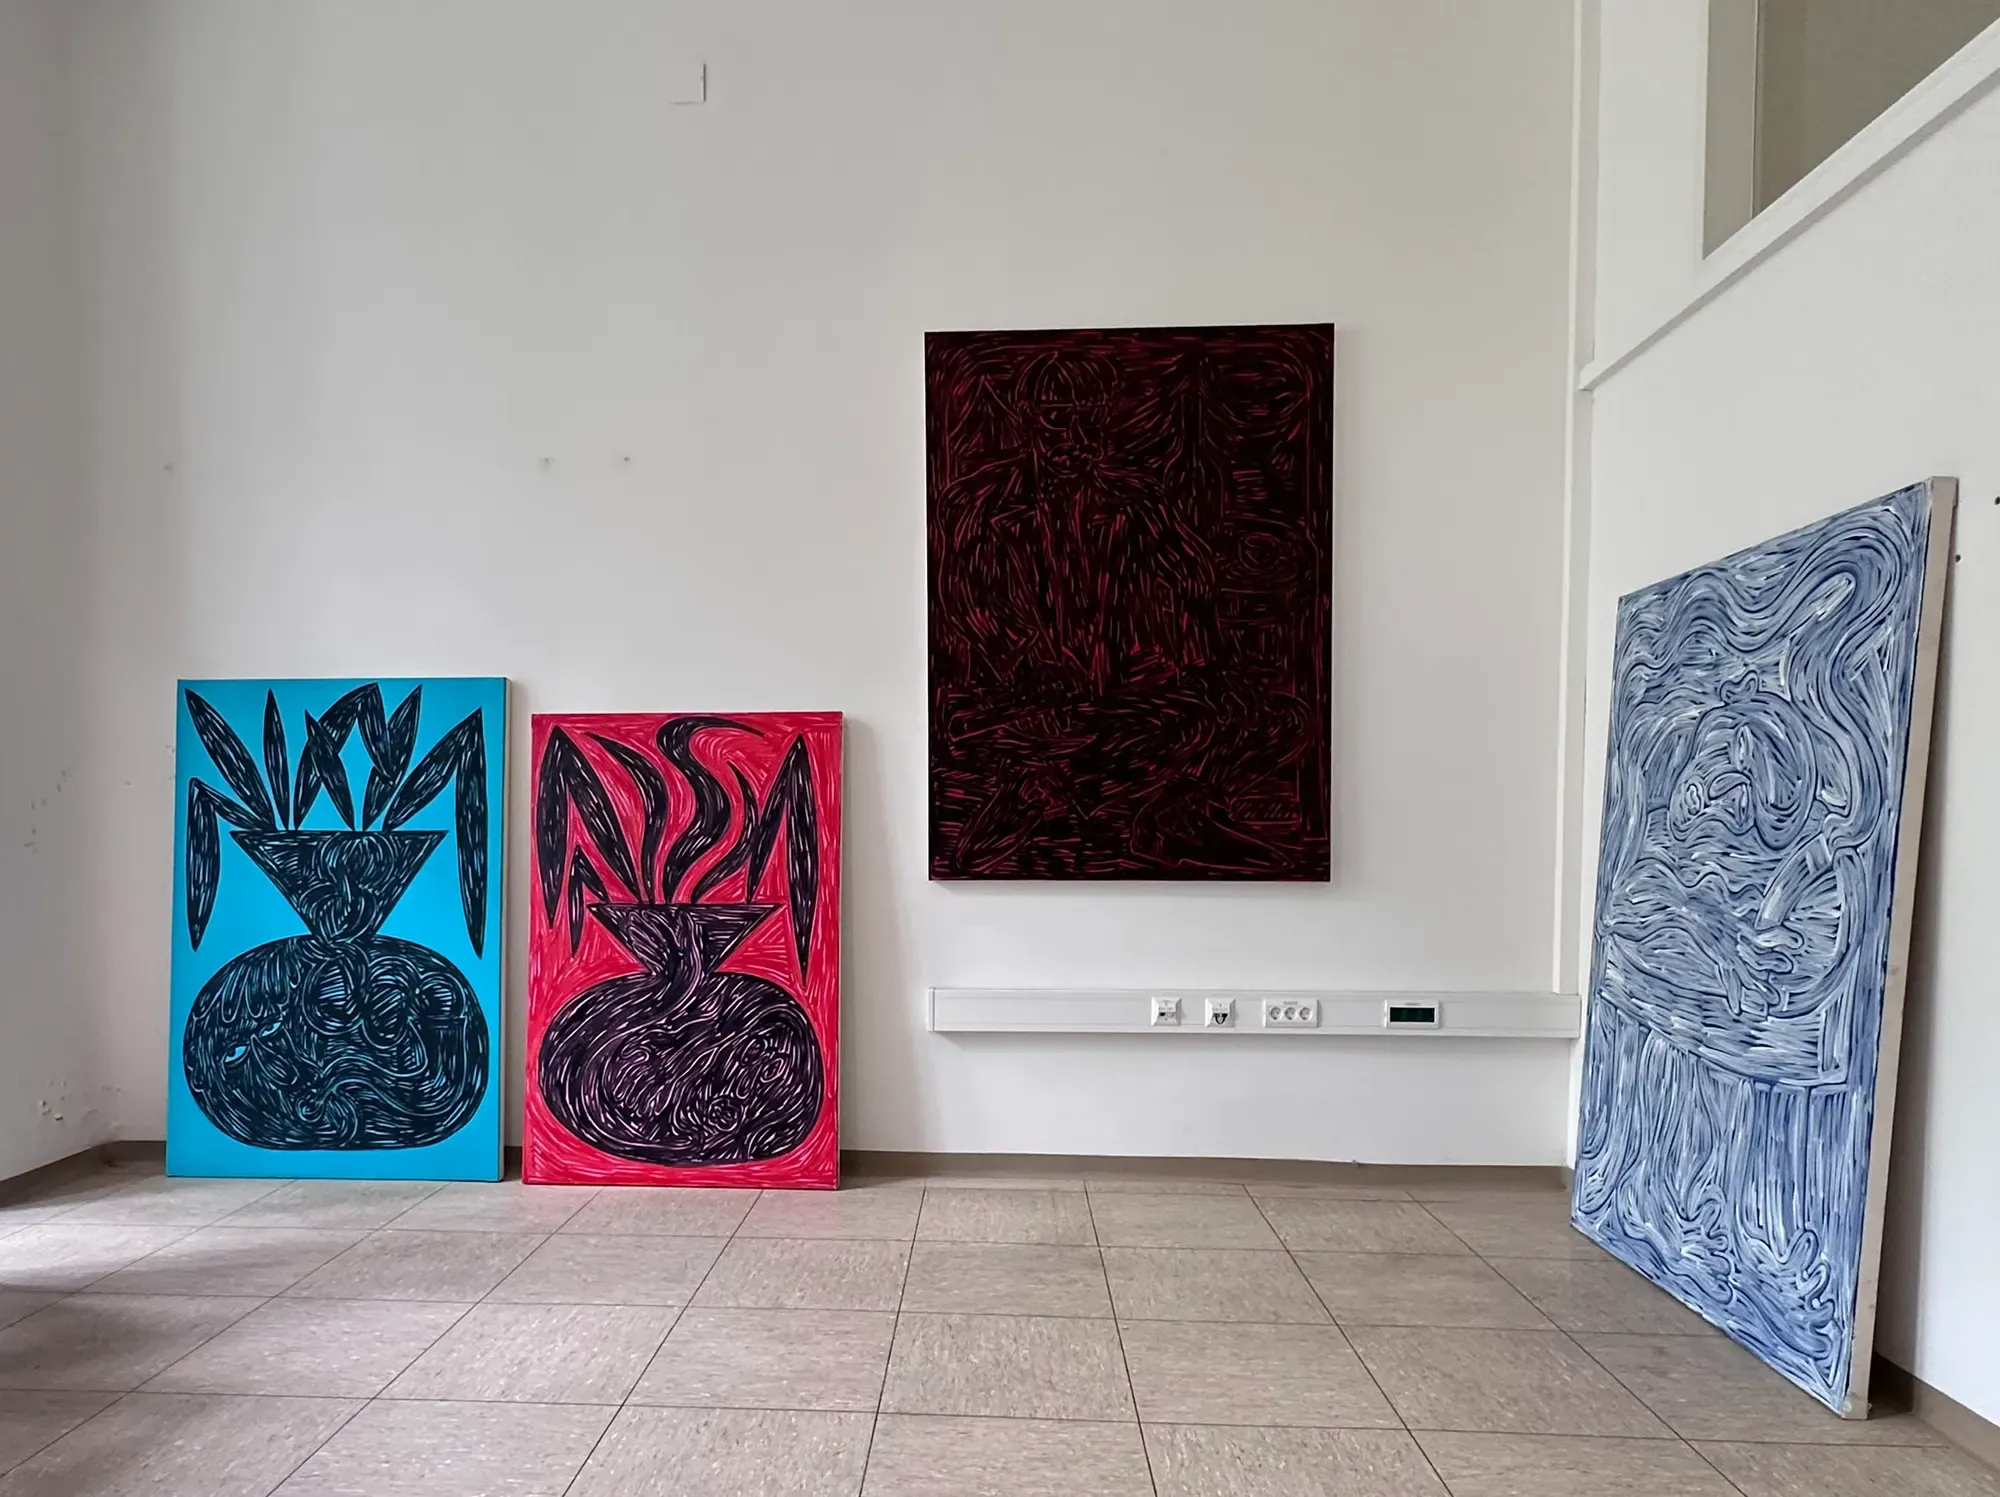 rade petrasevic, promising emerging artist, at Parallel Vienna with new paintings